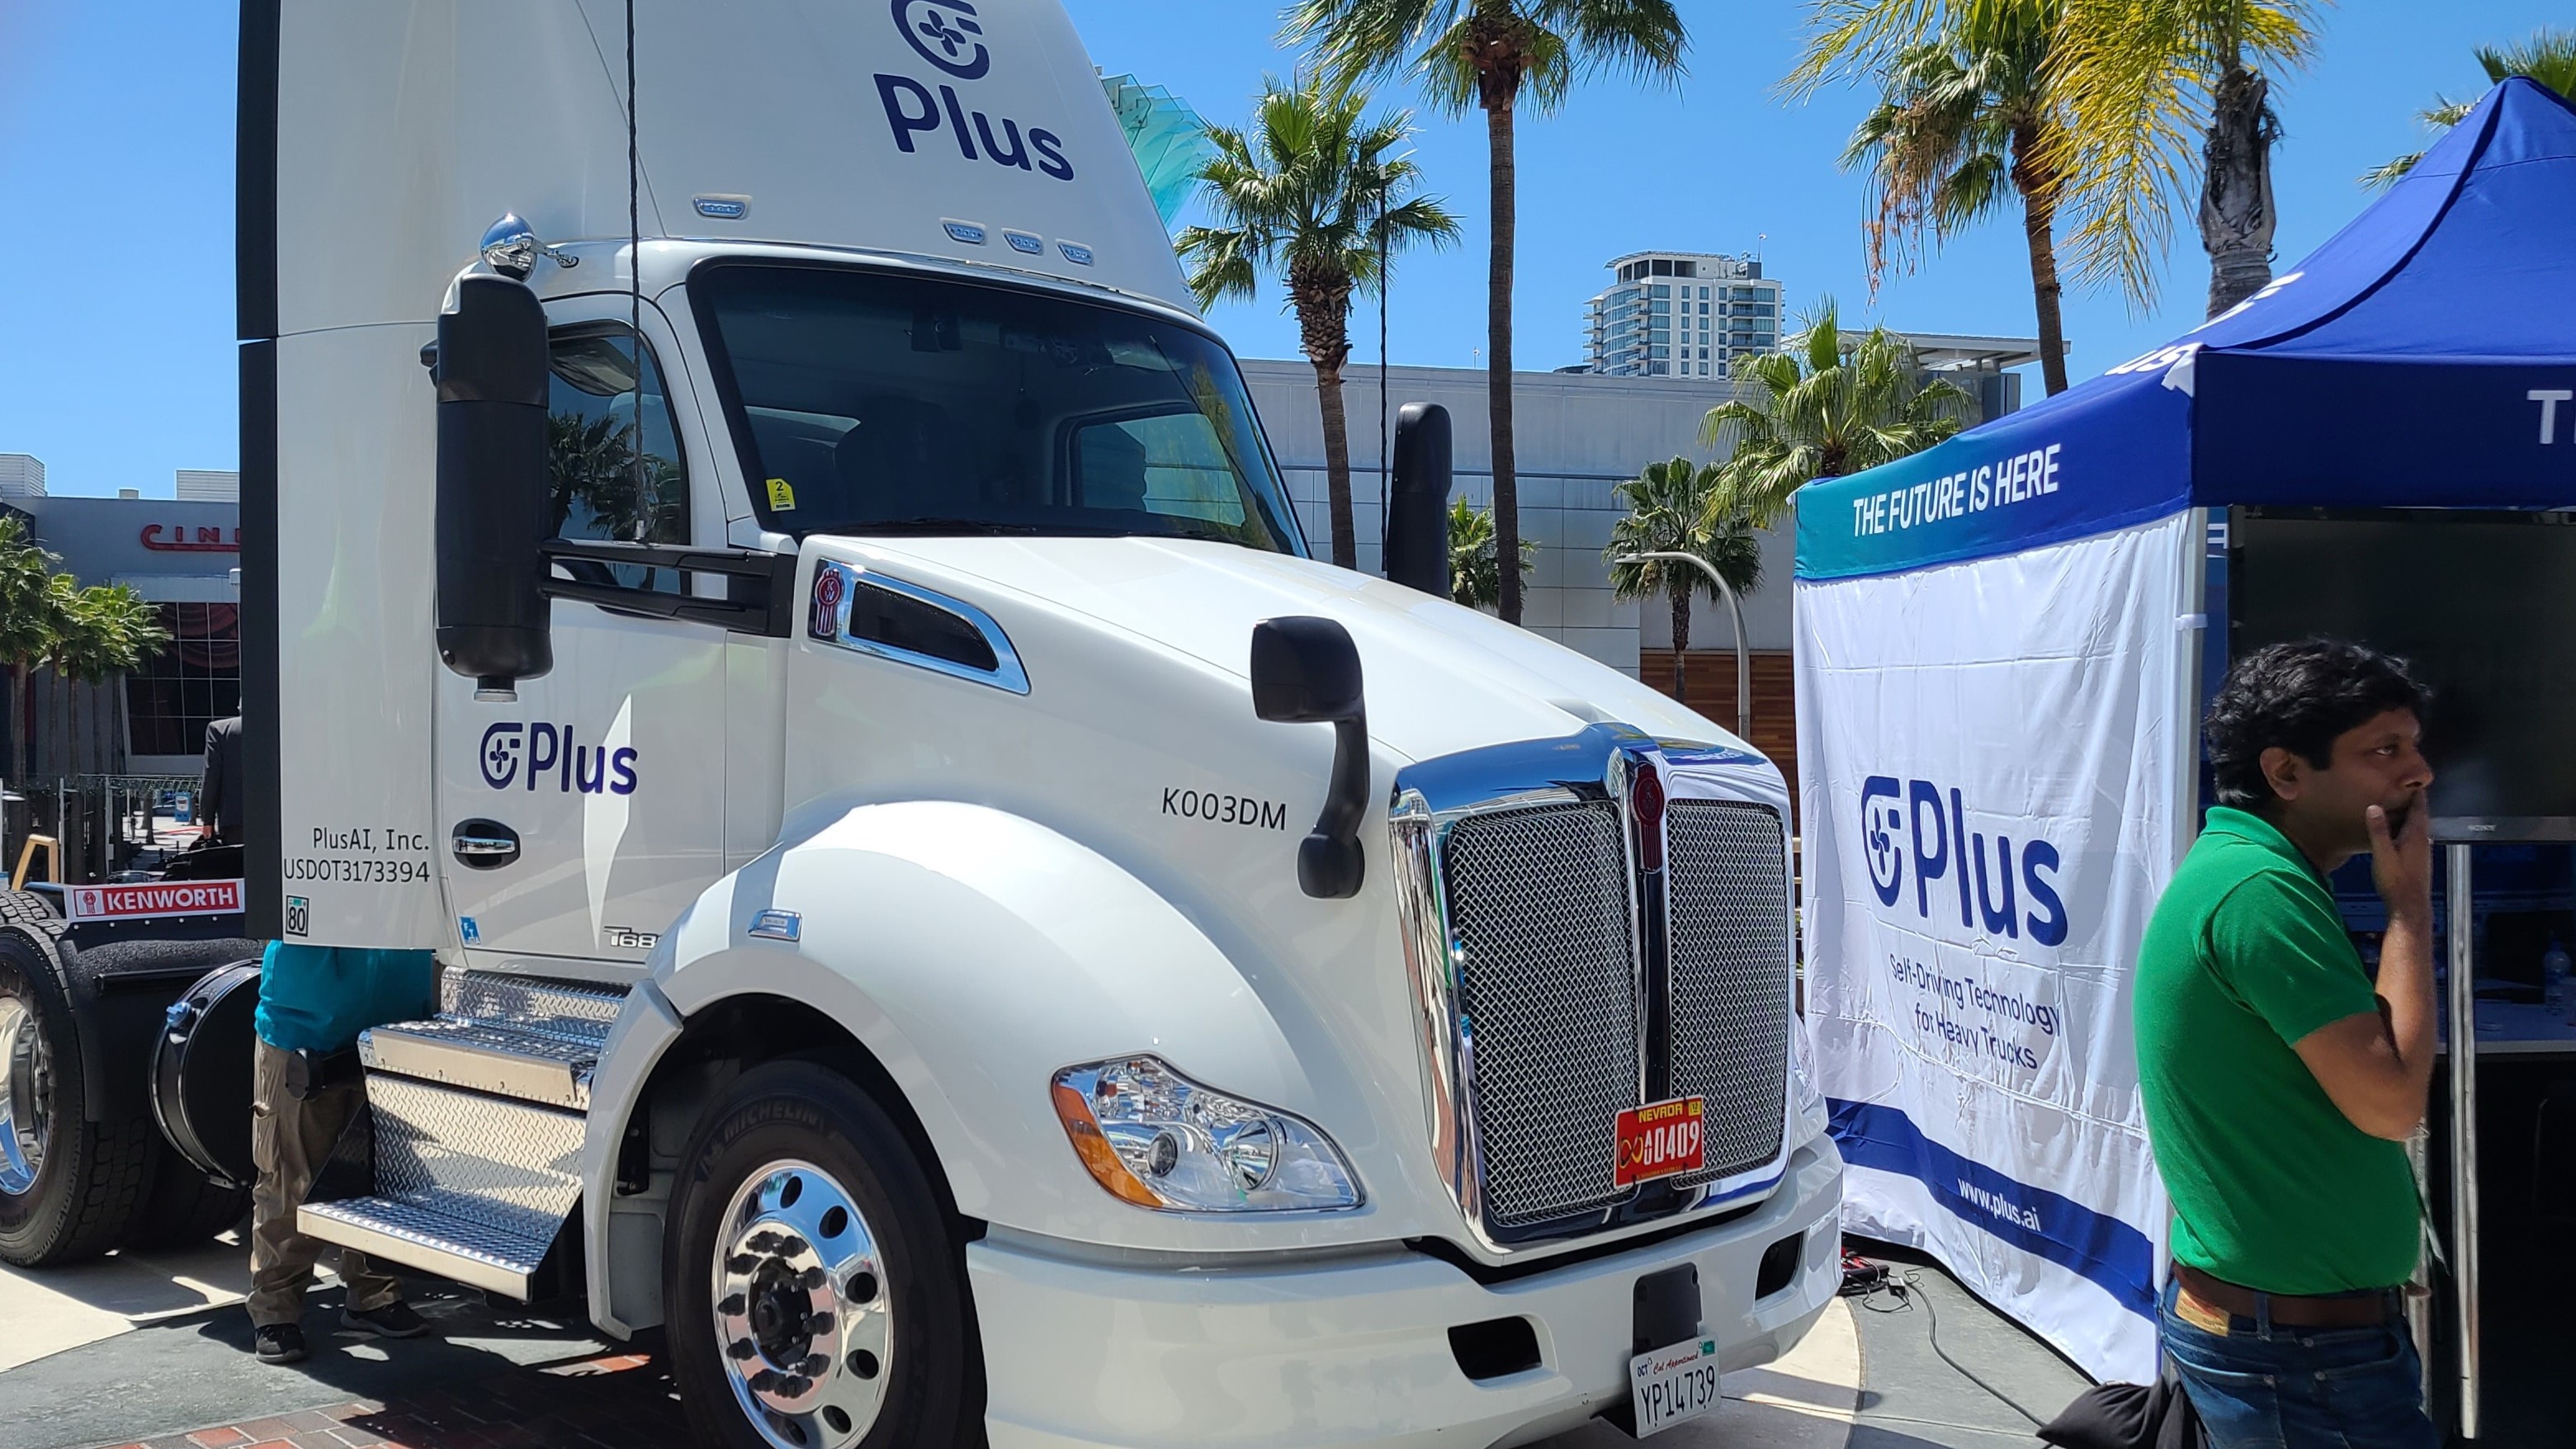 White truck from Plus outside Long Beach Convention Center with palm trees in background.